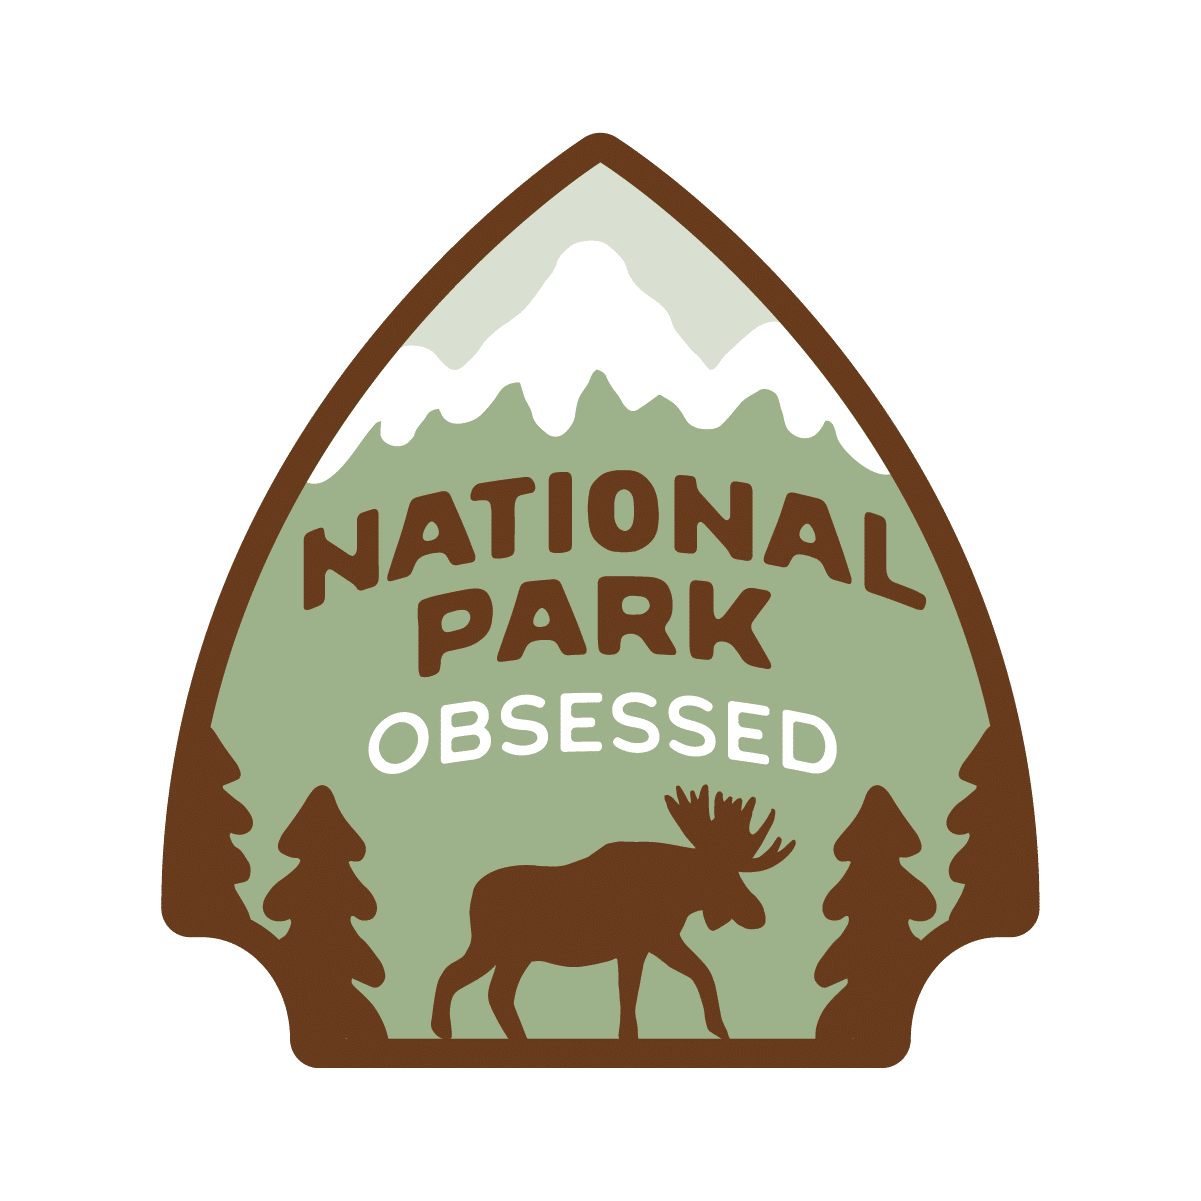 National Park Obsessed